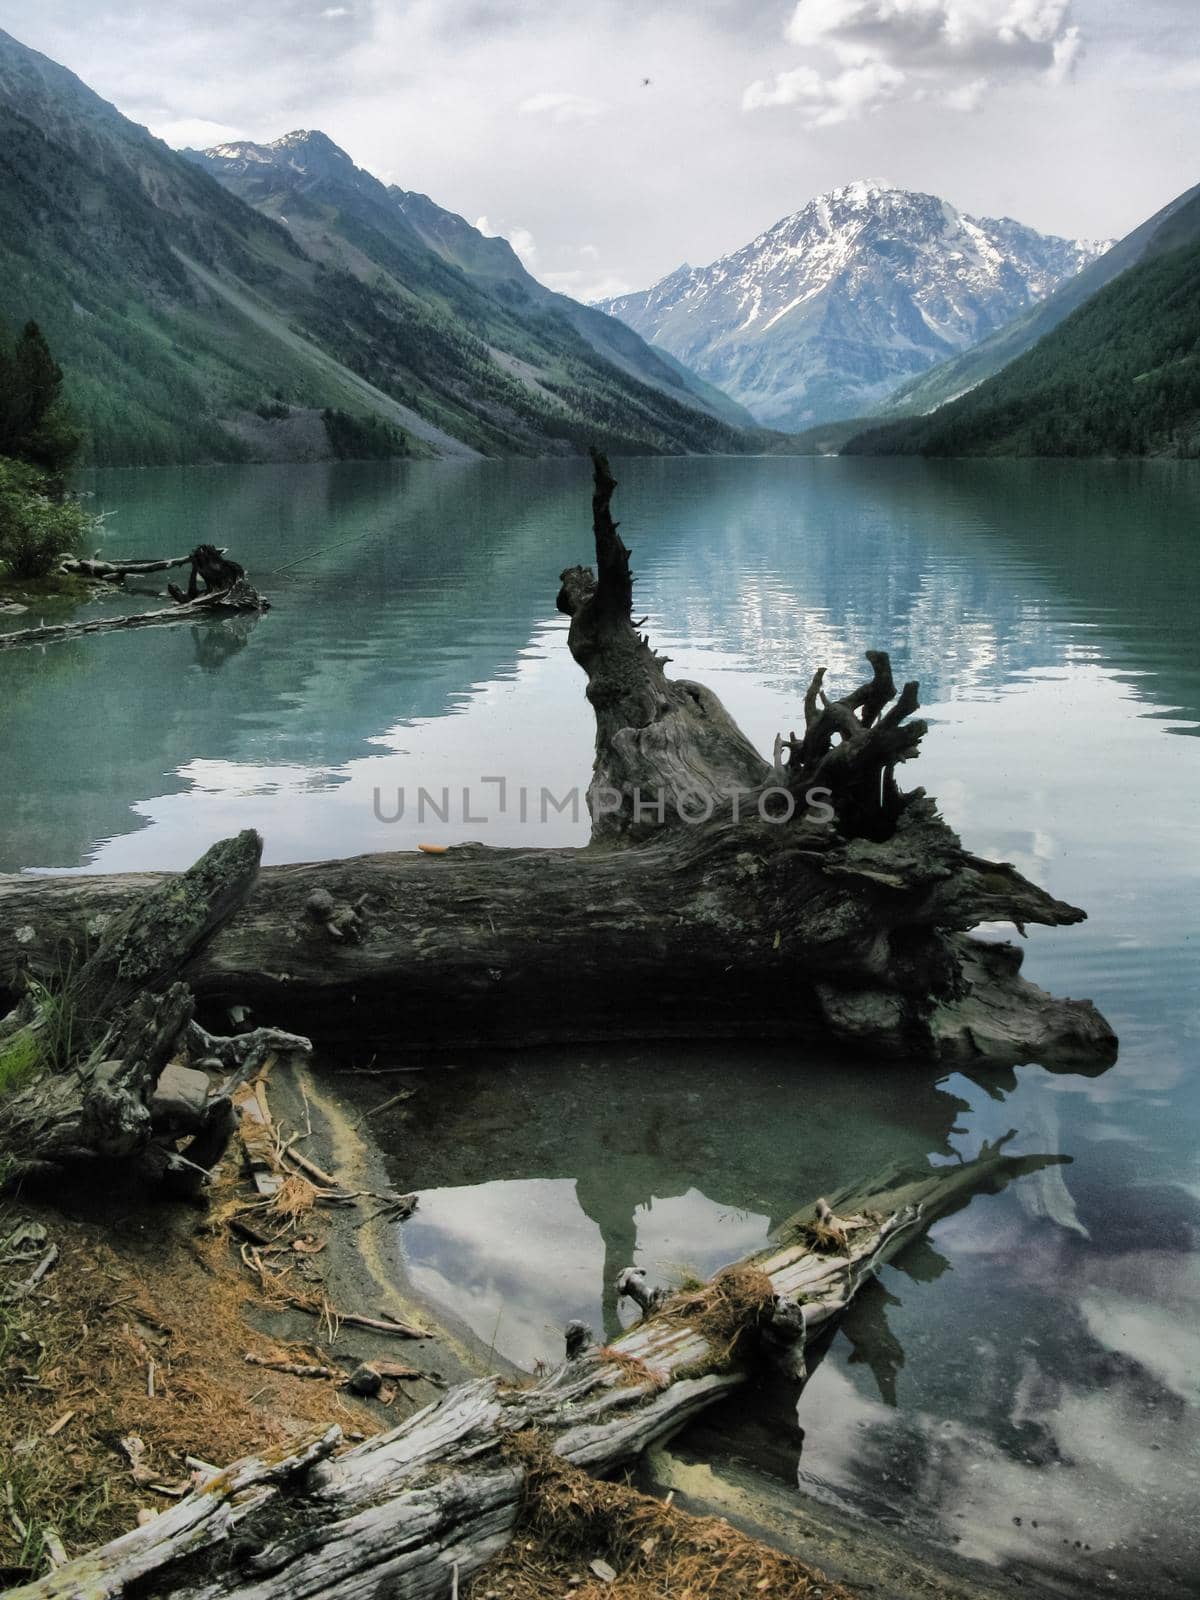 A large old snag lies on the banks of a mountain river.